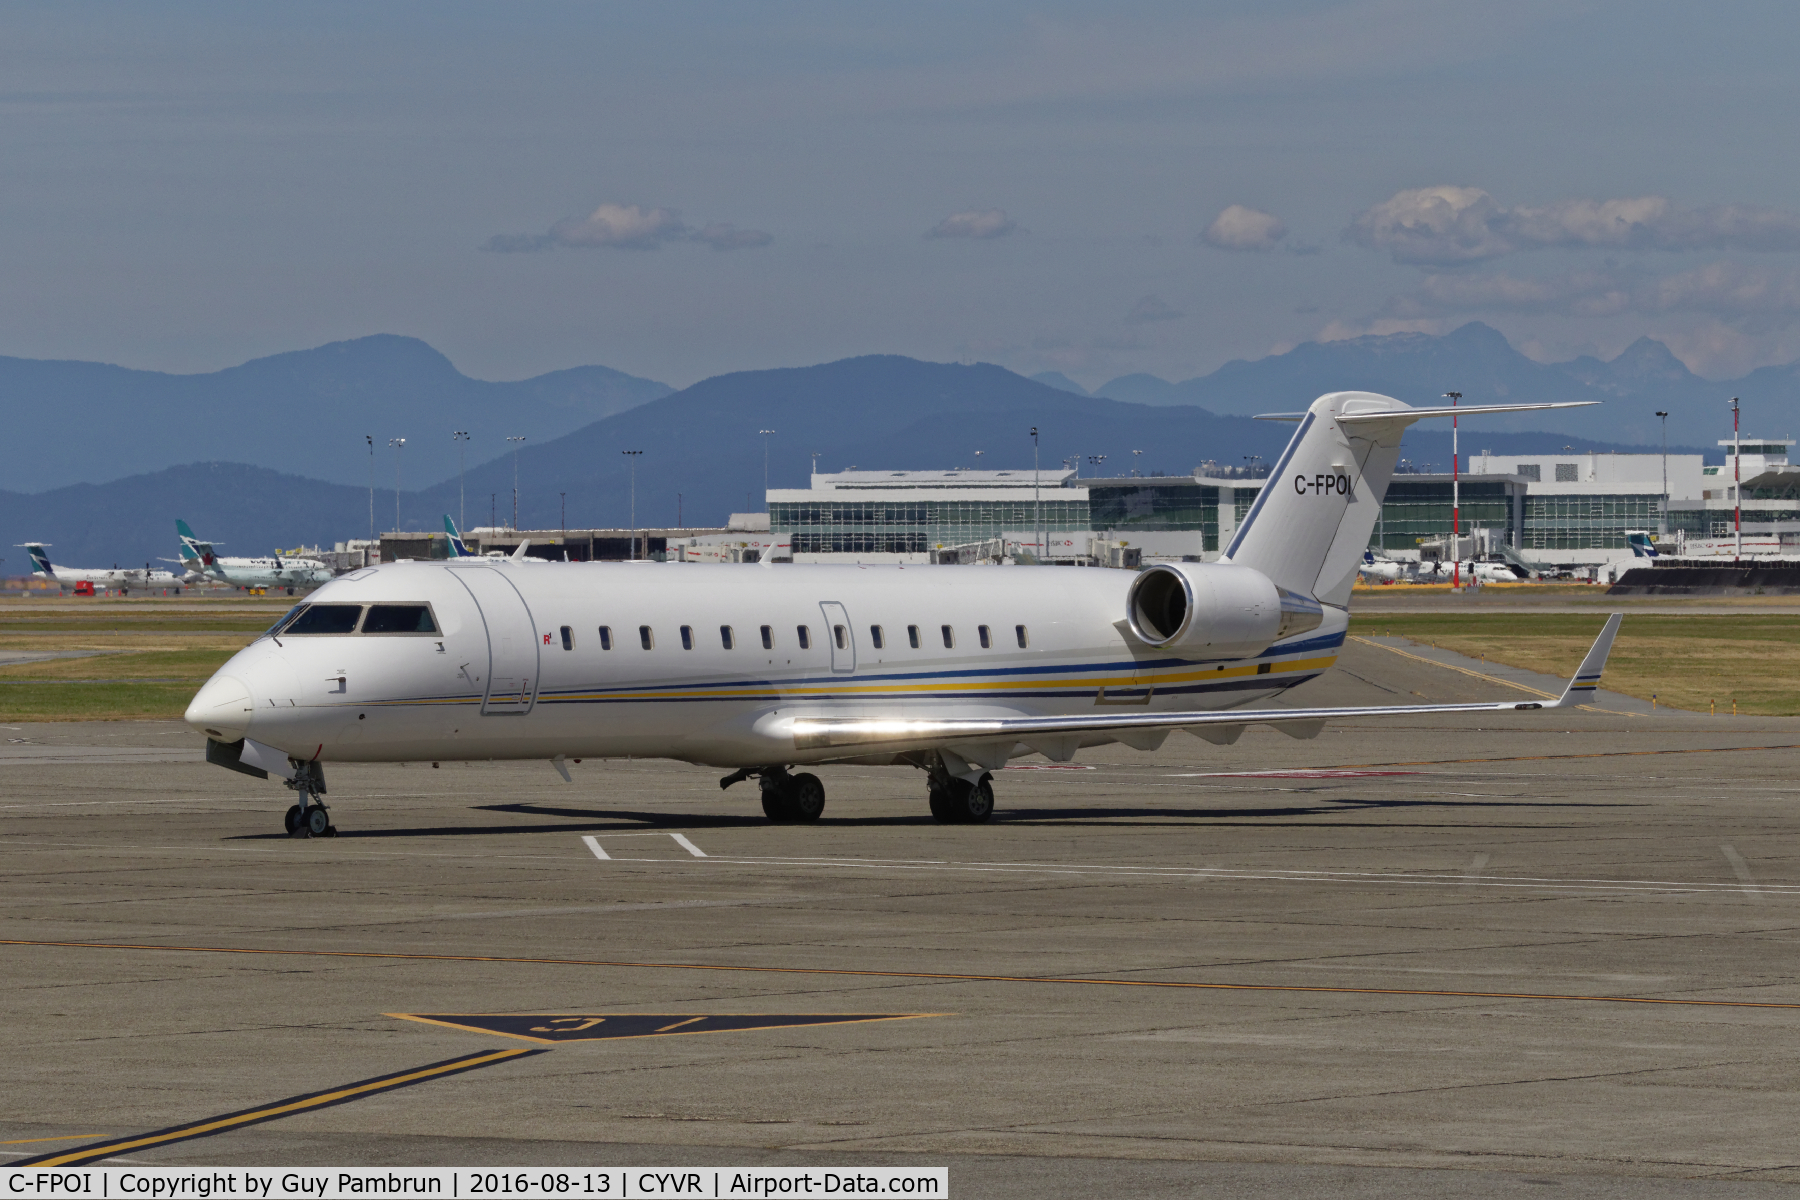 C-FPOI, 2005 Bombardier Challenger 850 (CL-600-2B19) C/N 8047, Just landed